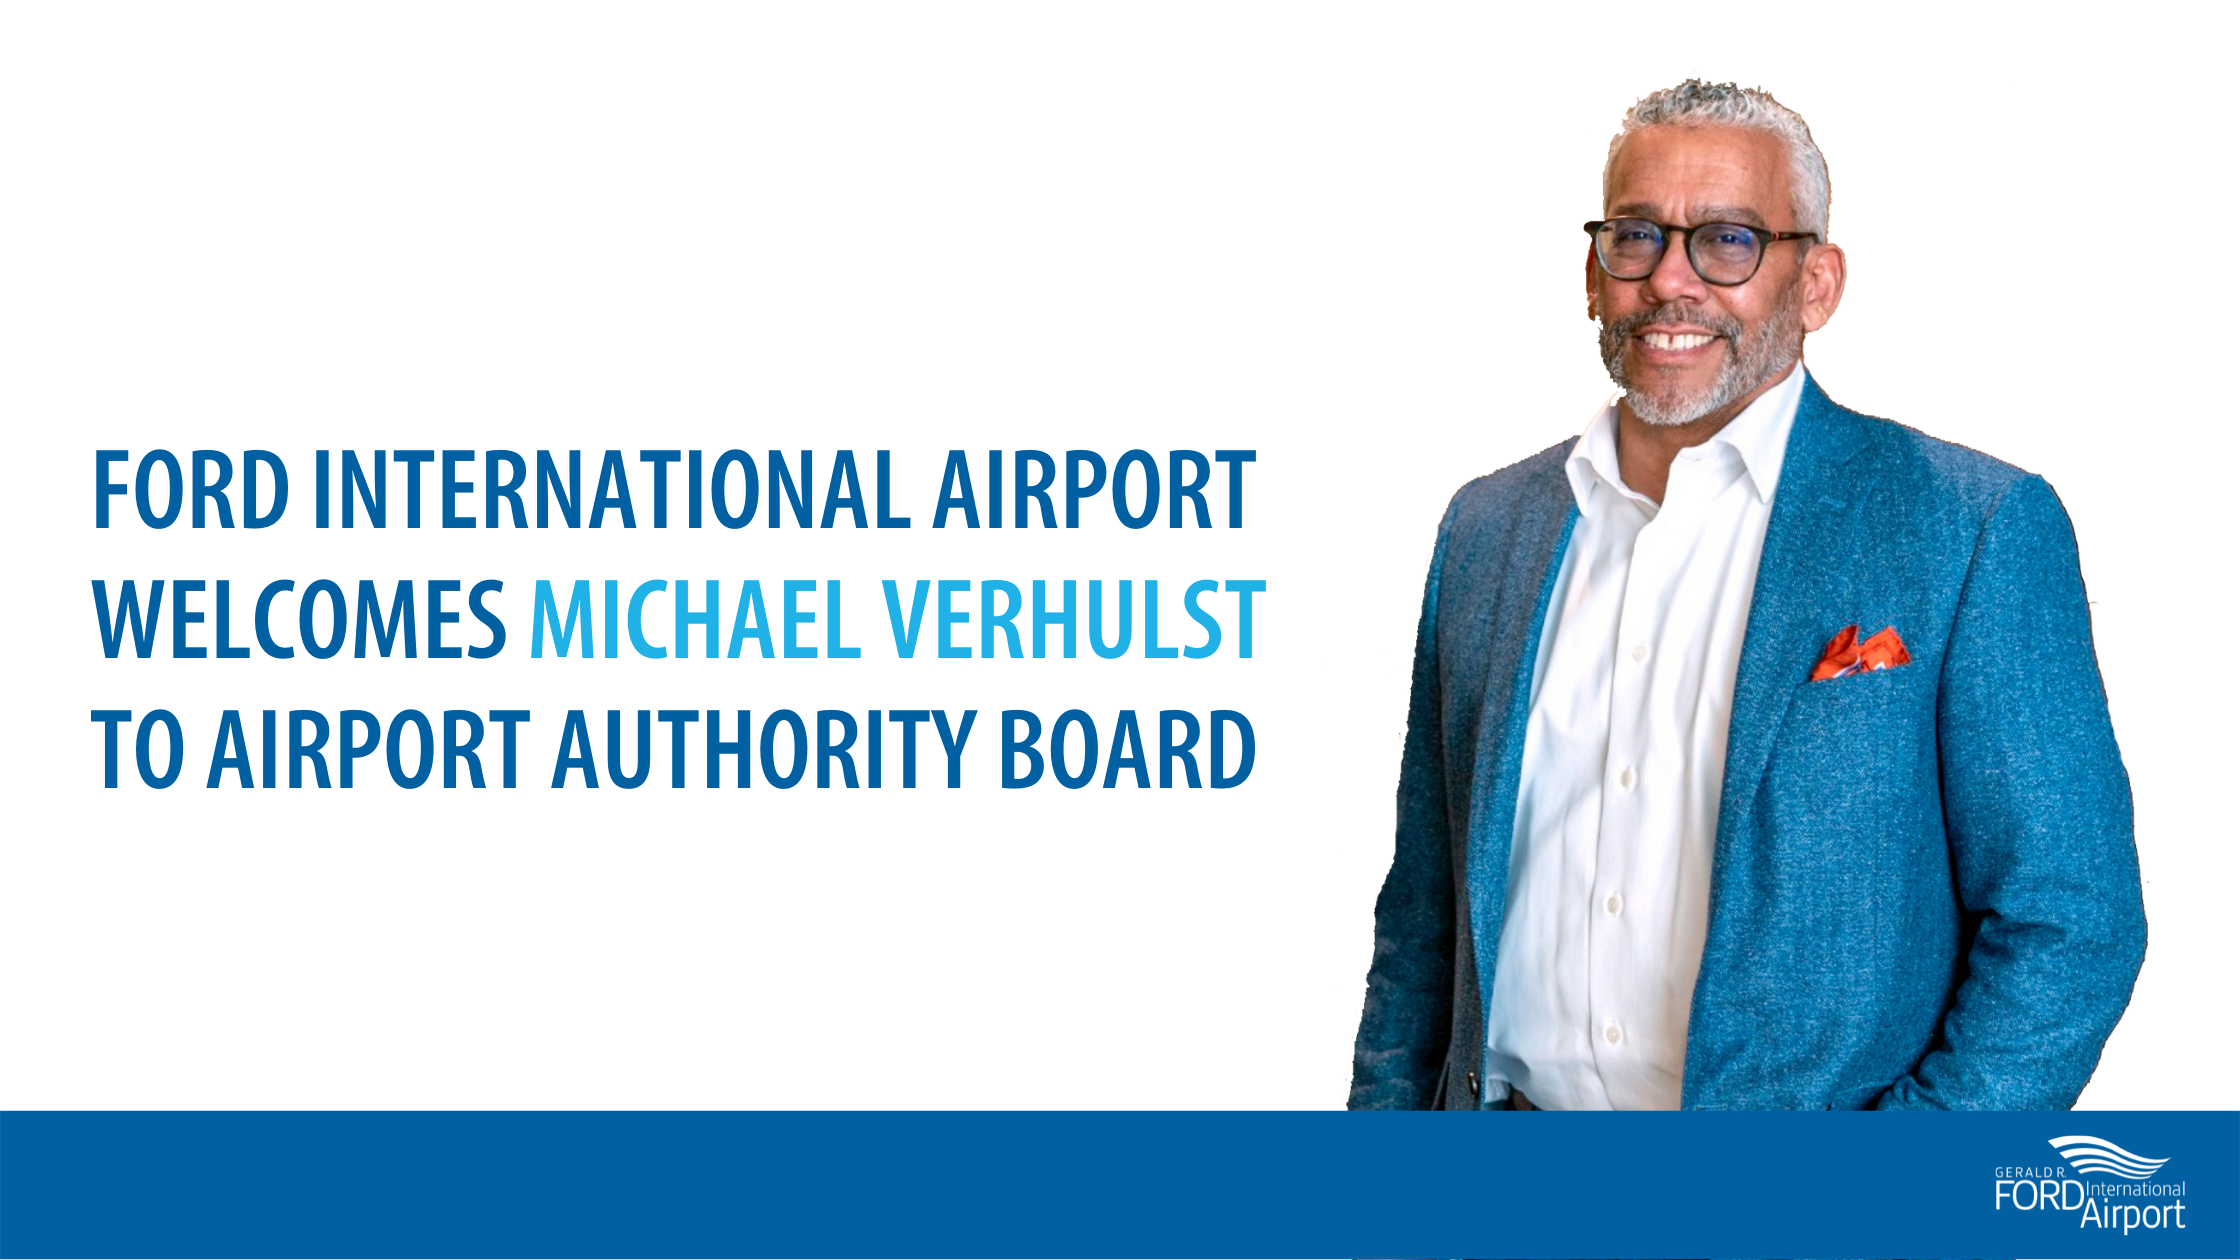 Michael Verhulst Appointed to Gerald R. Ford International Airport Authority Board